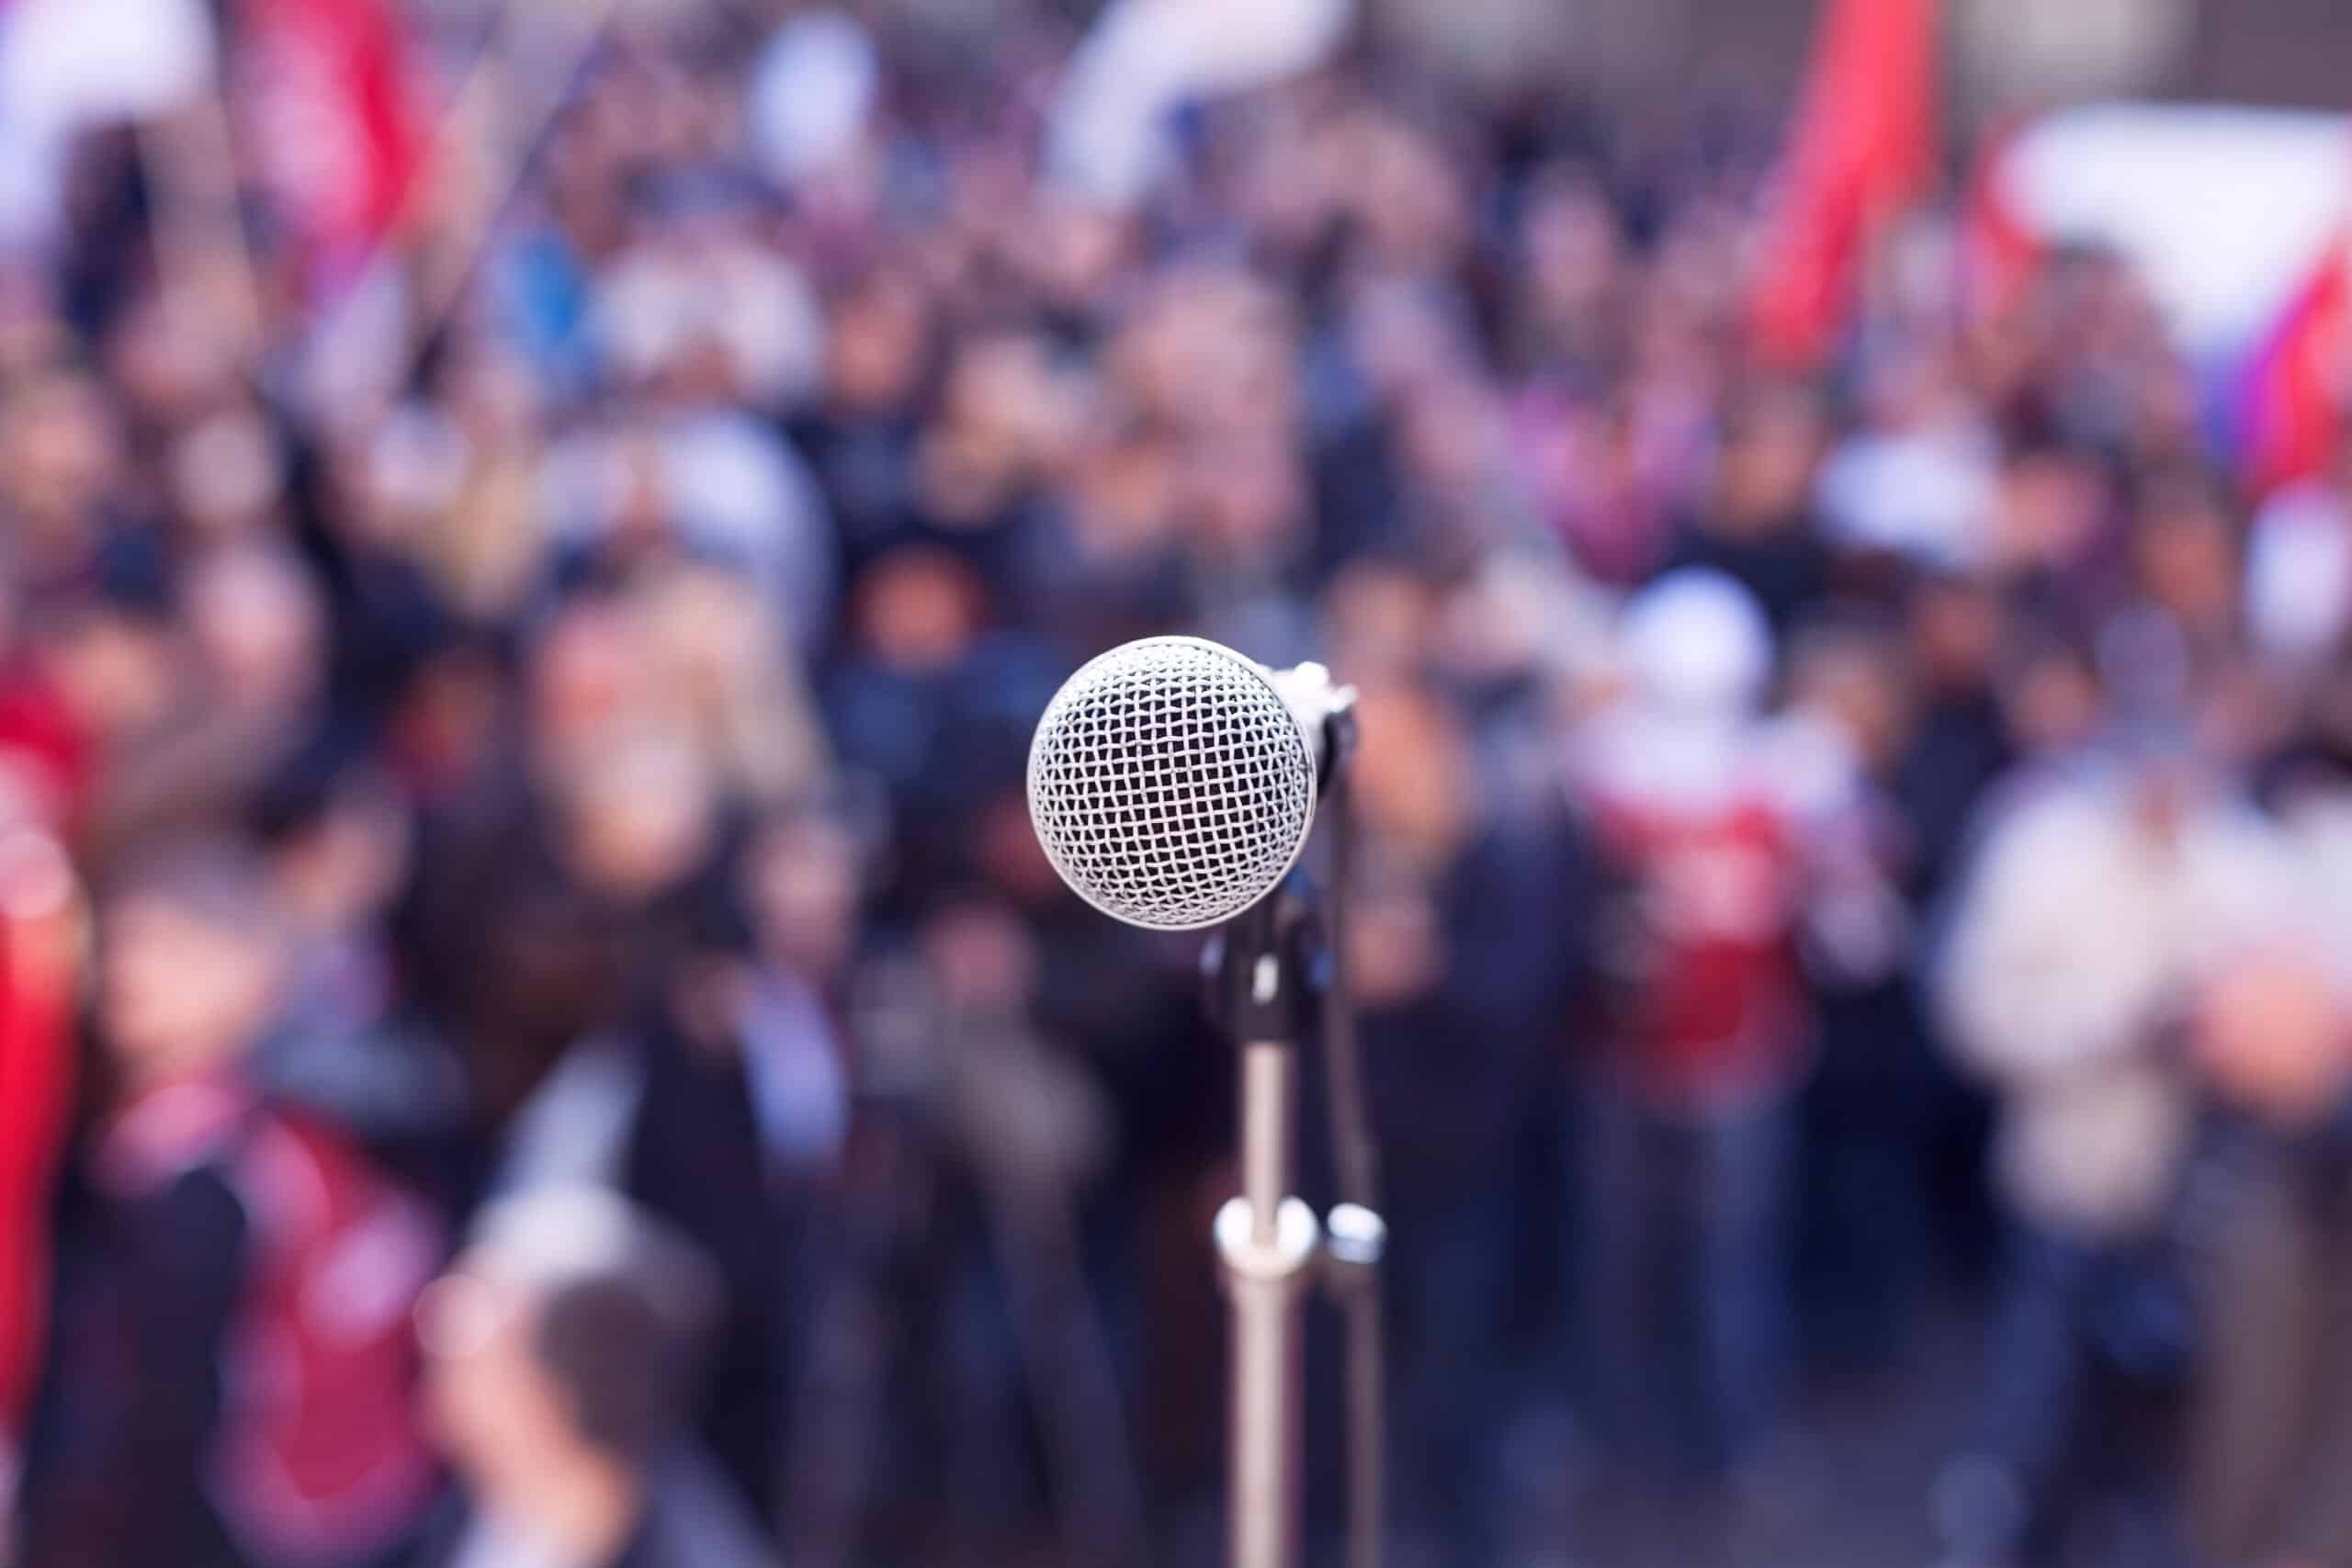 Political,Protest.,Demonstration.,Microphone,In,Focus,Against,Blurred,Crowd.